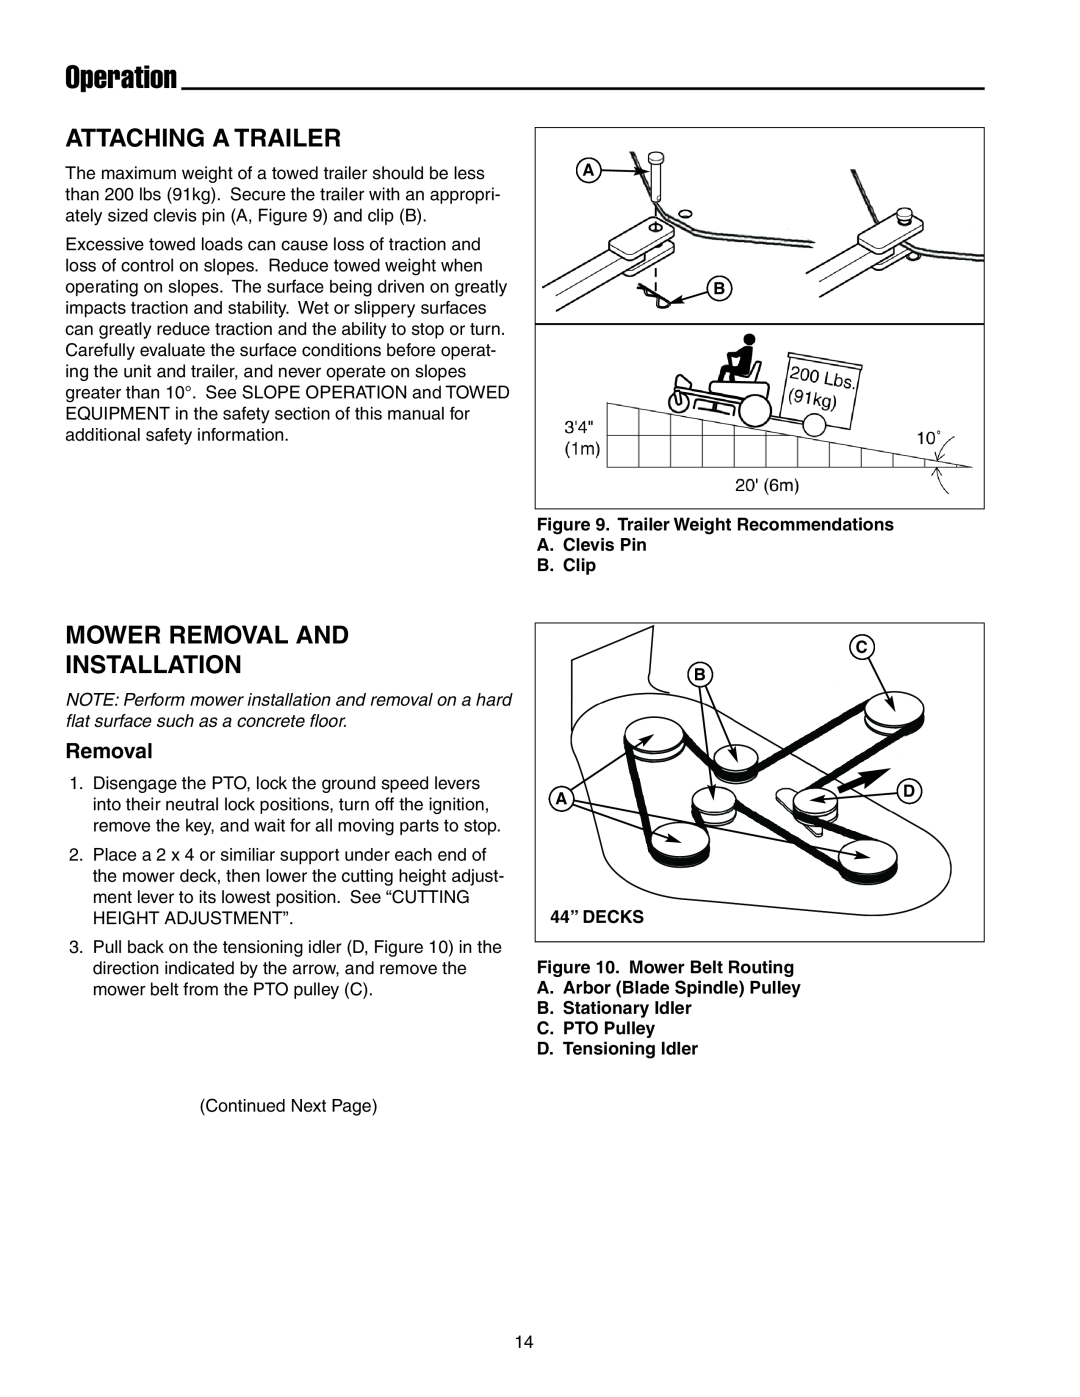 Simplicity 250 Z manual Attaching A Trailer, Mower Removal And Installation, Operation, 44” DECKS 